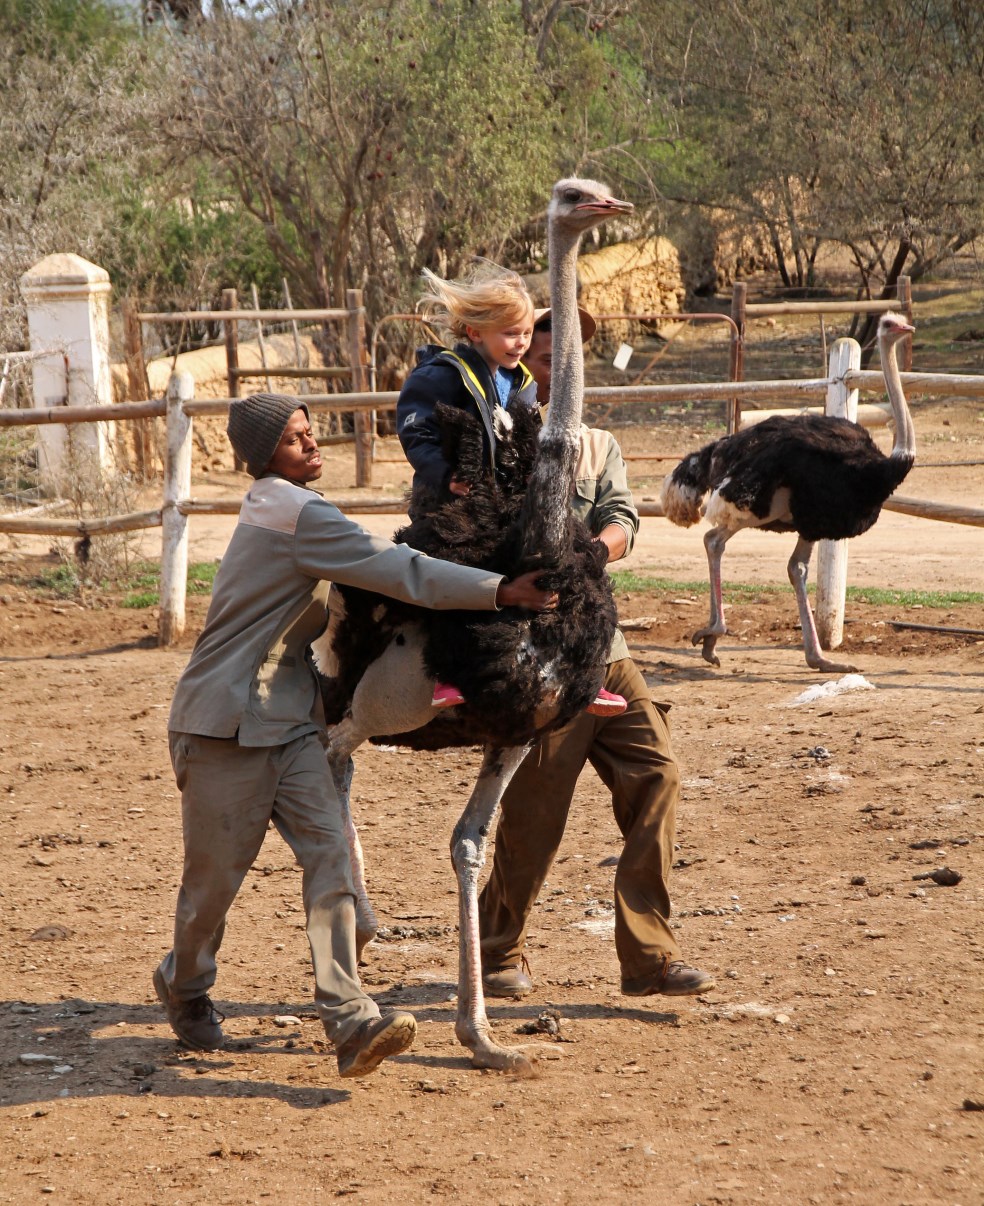 Riding an ostrich, a once-in-a-lifetime sport.